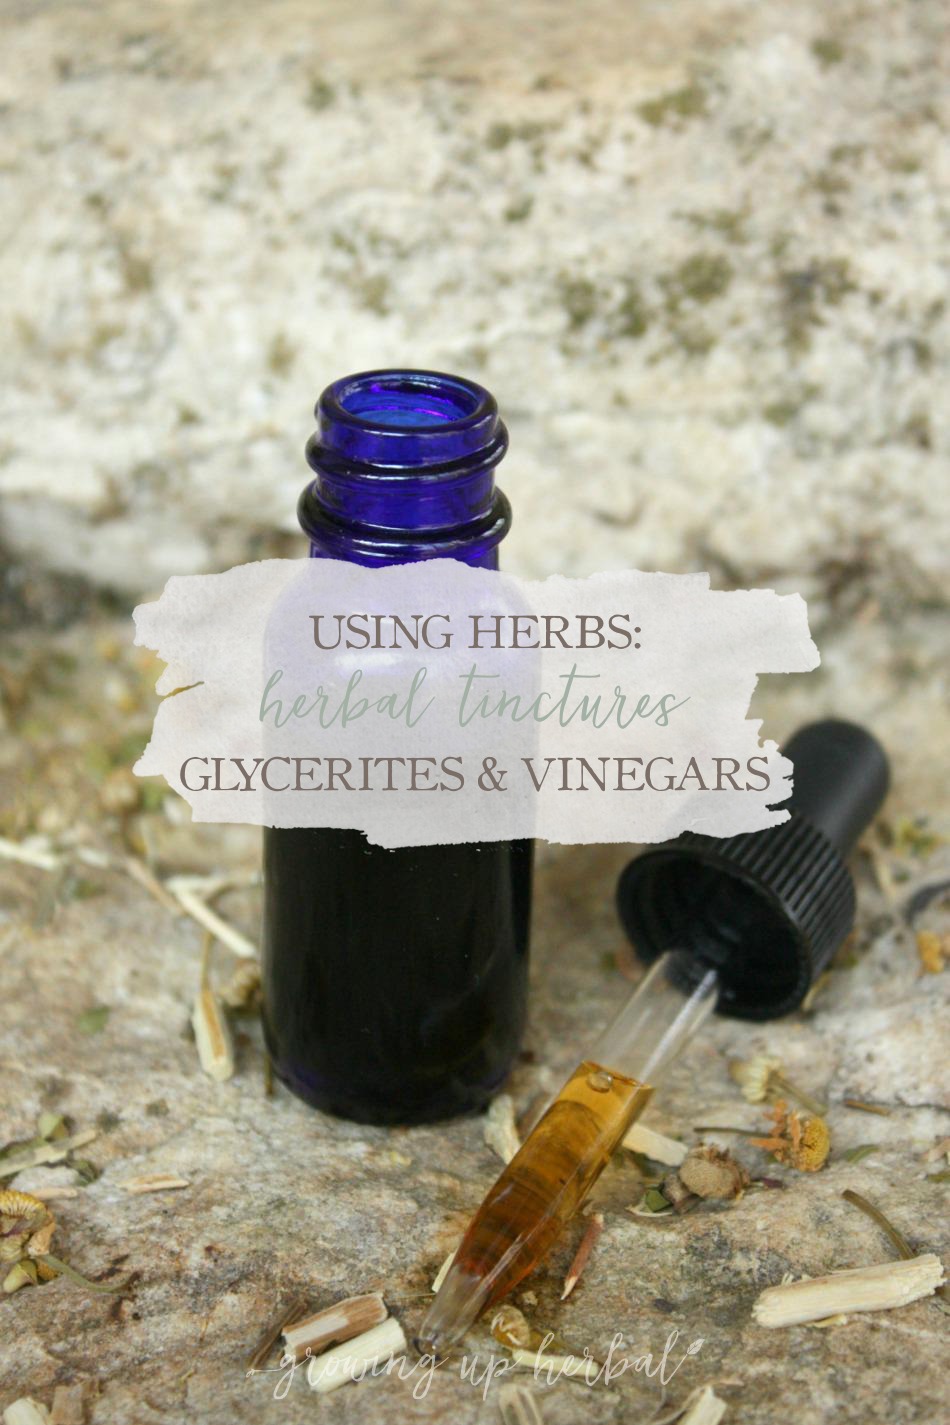 Using Herbs: Herbal Tinctures, Glycerites, And Vinegars | Growing Up Herbal | Learn all about herbal tinctures, glycerites, and vinegars in today's How To Start Using Herbs post!